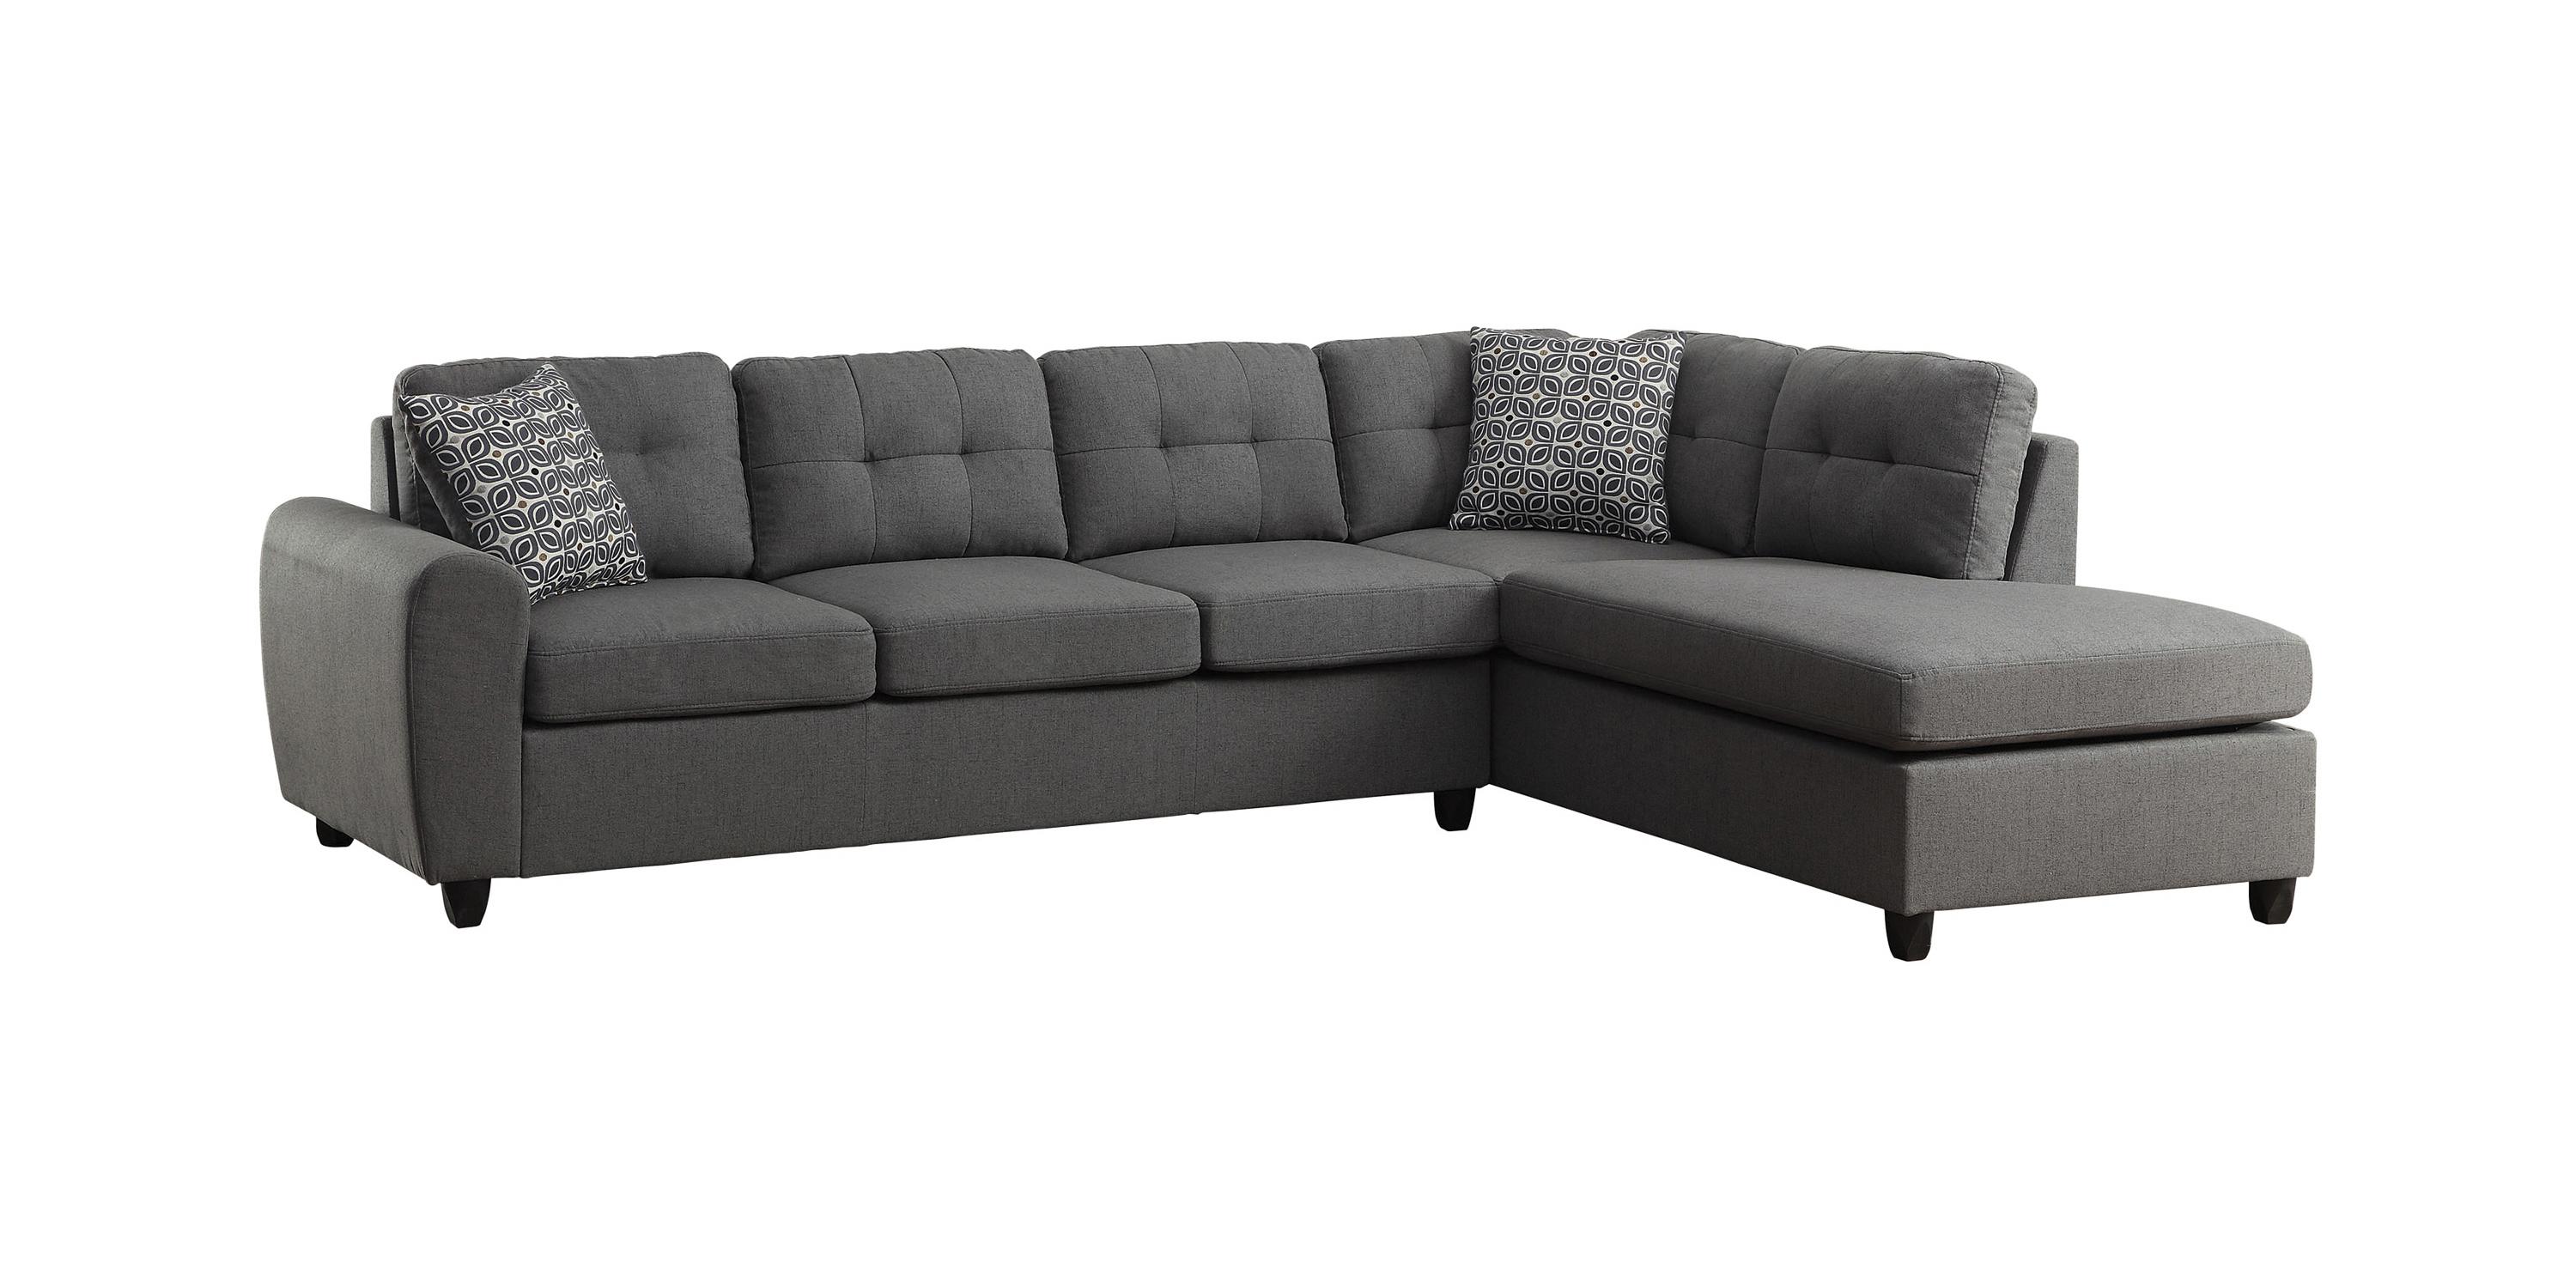 Transitional Sectional 500413 Stonenesse 500413 in Gray 